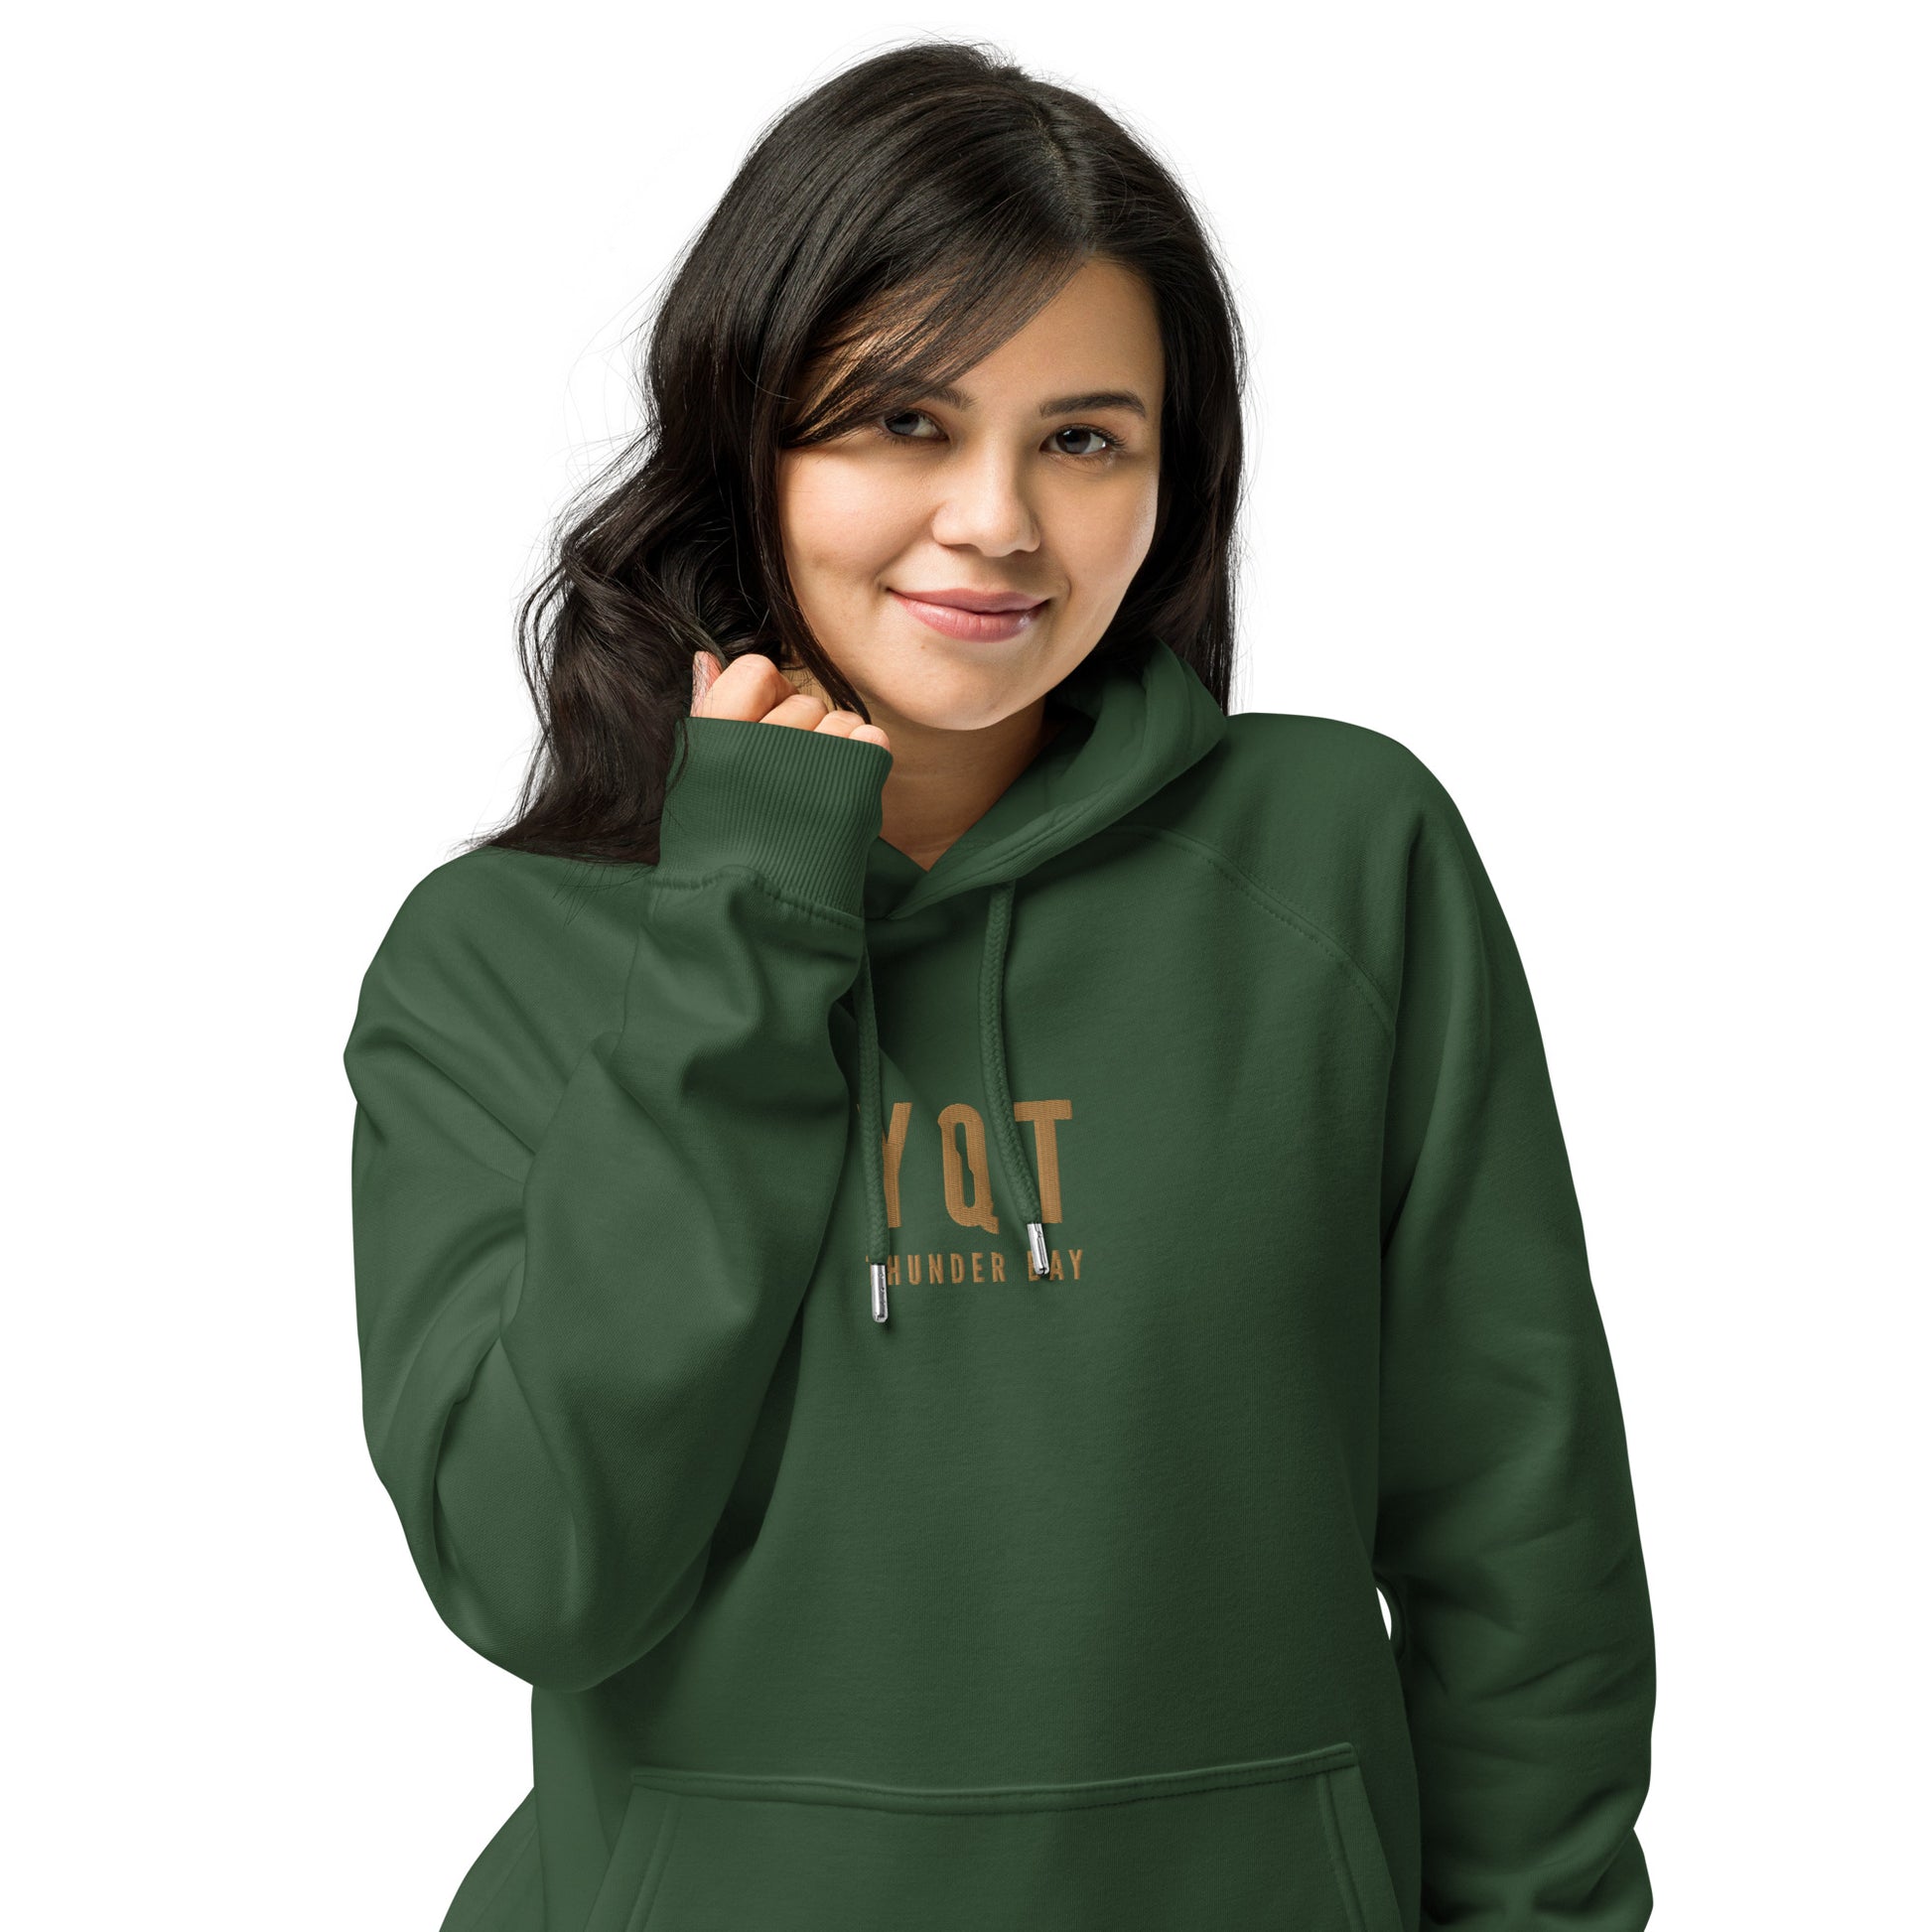 City Organic Hoodie - Old Gold • YQT Thunder Bay • YHM Designs - Image 03